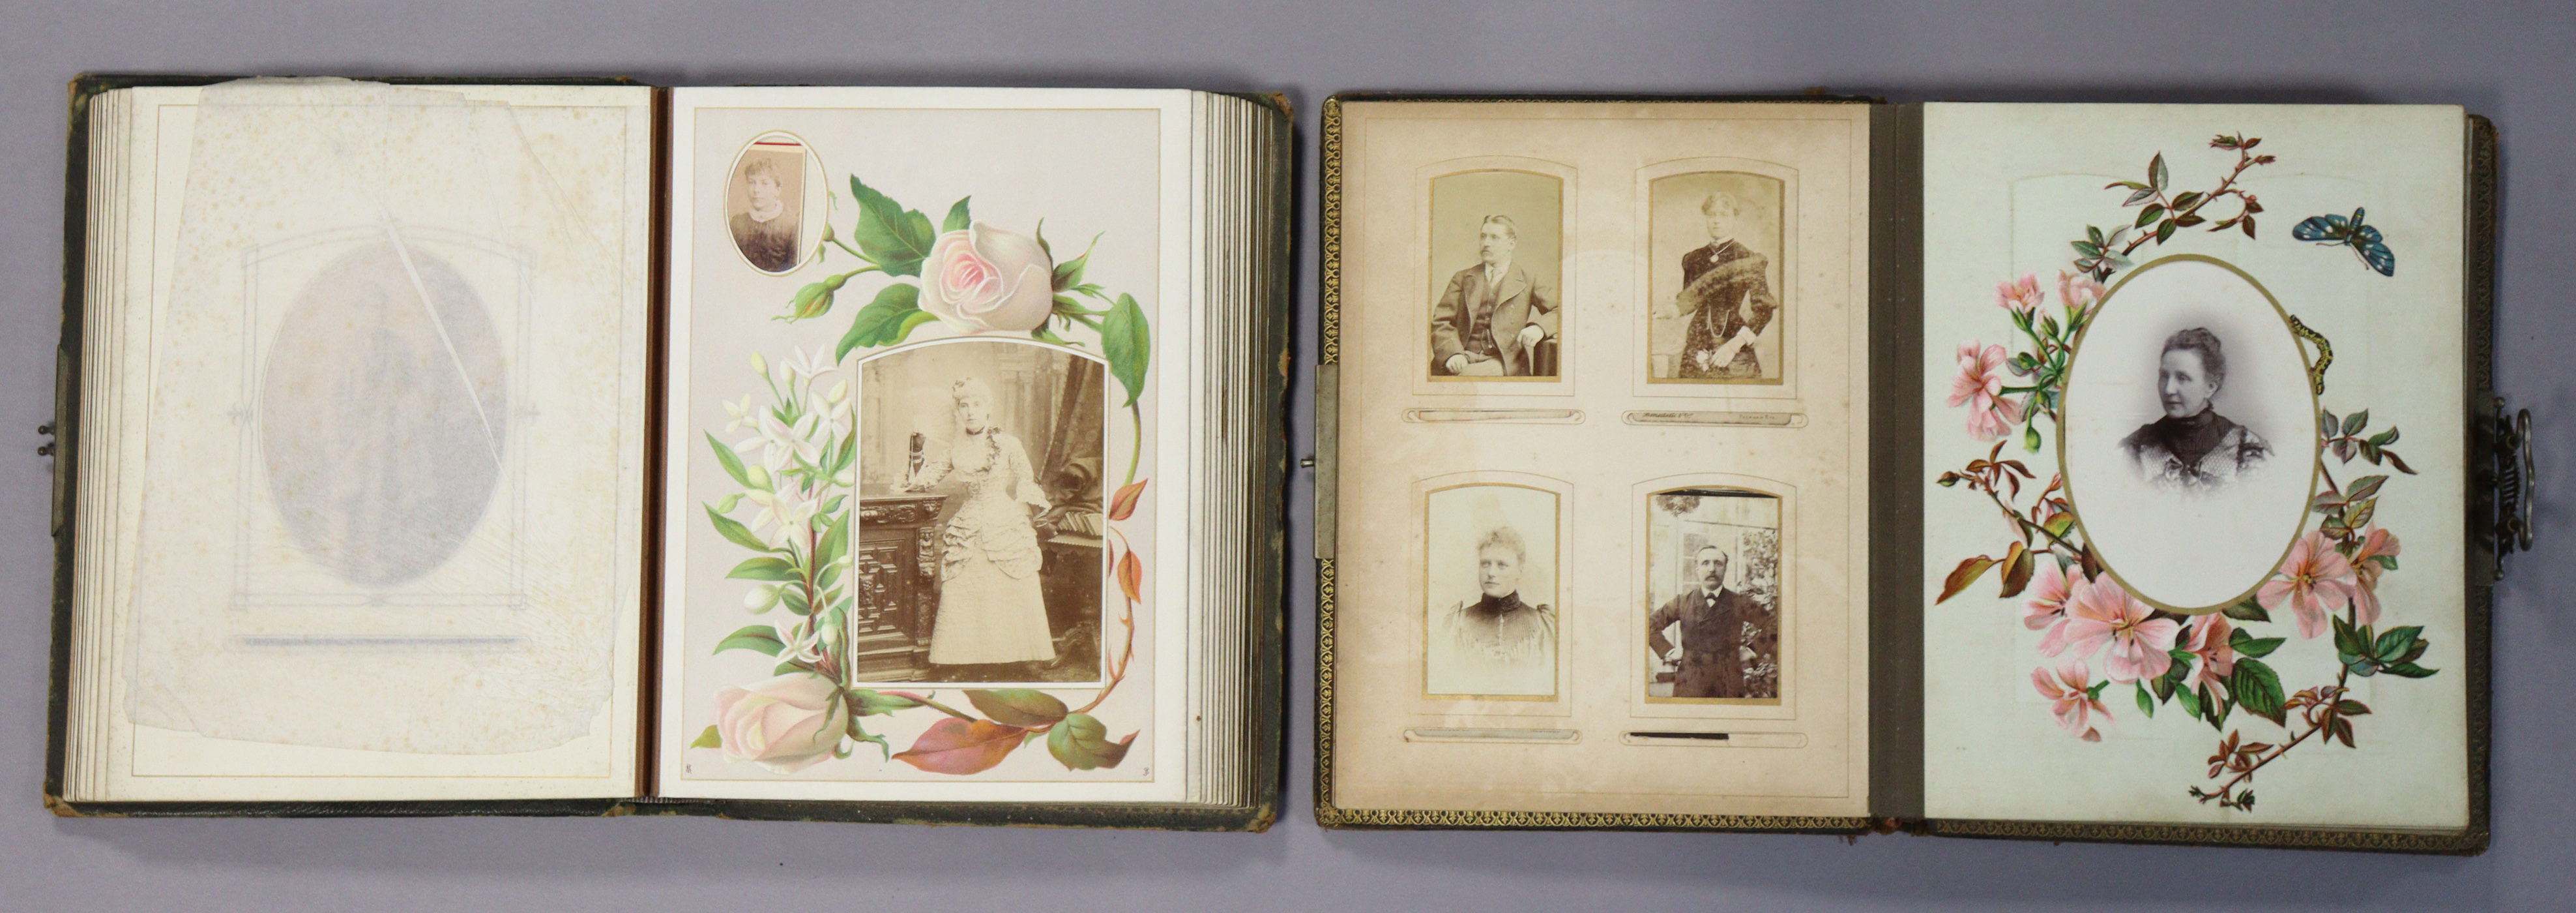 Two late 19th/early 20th century leather-bound family photograph albums containing a total of one - Image 3 of 6